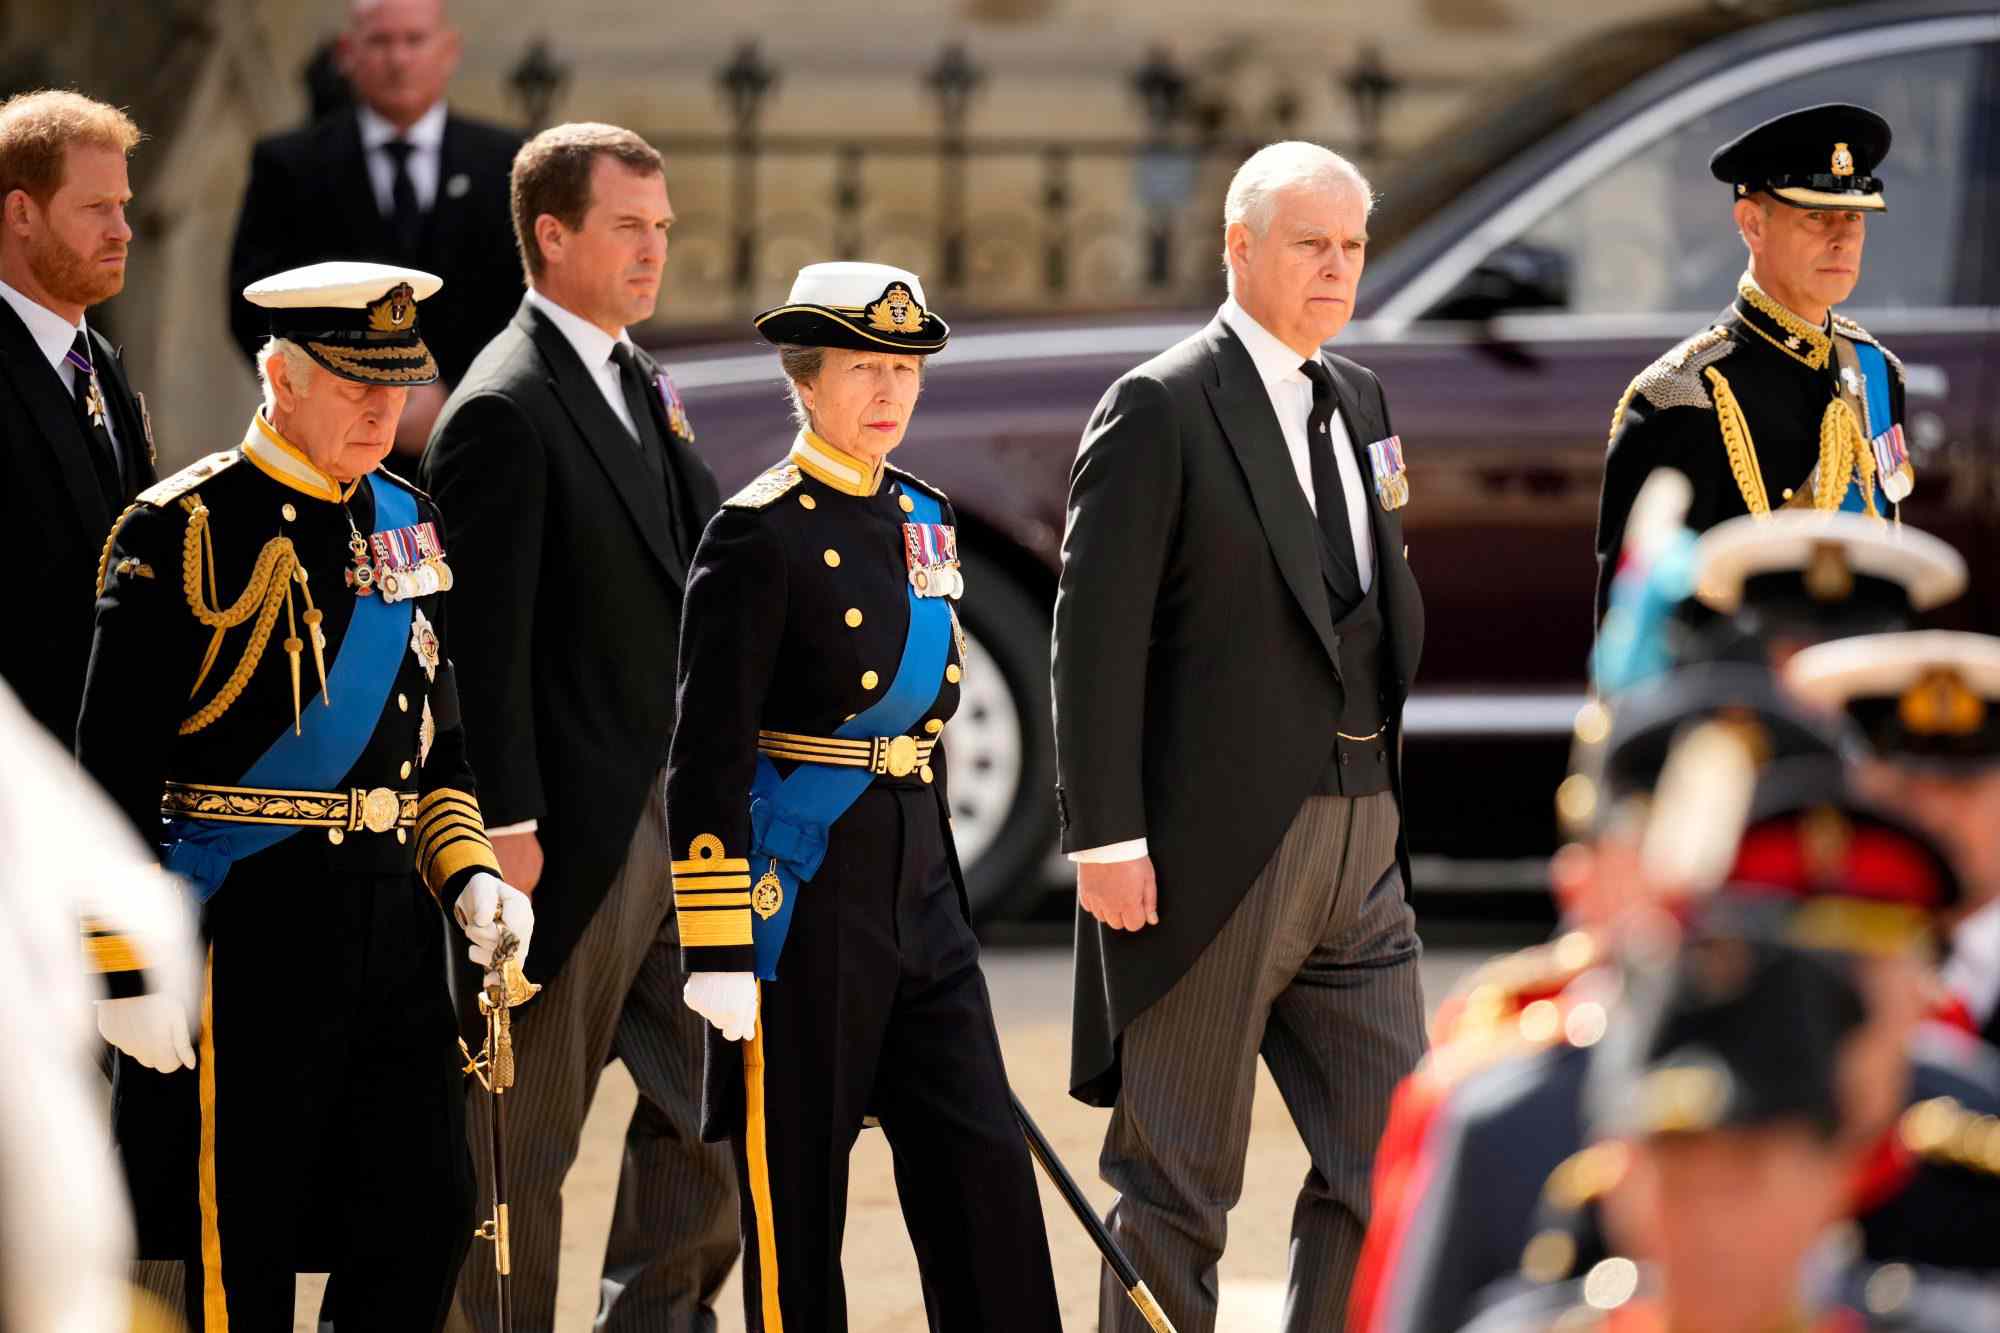 LONDON, ENGLAND - SEPTEMBER 19: Prince Harry, Duke of Sussex, King Charles III, Peter Phillips, Anne, Princess Royal, Prince Andrew, Duke of York and Prince Edward, Earl of Wessex depart Westminster Abbey after the funeral service of Queen Elizabeth II on September 19, 2022 in London, England. Elizabeth Alexandra Mary Windsor was born in Bruton Street, Mayfair, London on 21 April 1926. She married Prince Philip in 1947 and ascended the throne of the United Kingdom and Commonwealth on 6 February 1952 after the death of her Father, King George VI. Queen Elizabeth II died at Balmoral Castle in Scotland on September 8, 2022, and is succeeded by her eldest son, King Charles III. (Photo by Christopher Furlong/Getty Images)